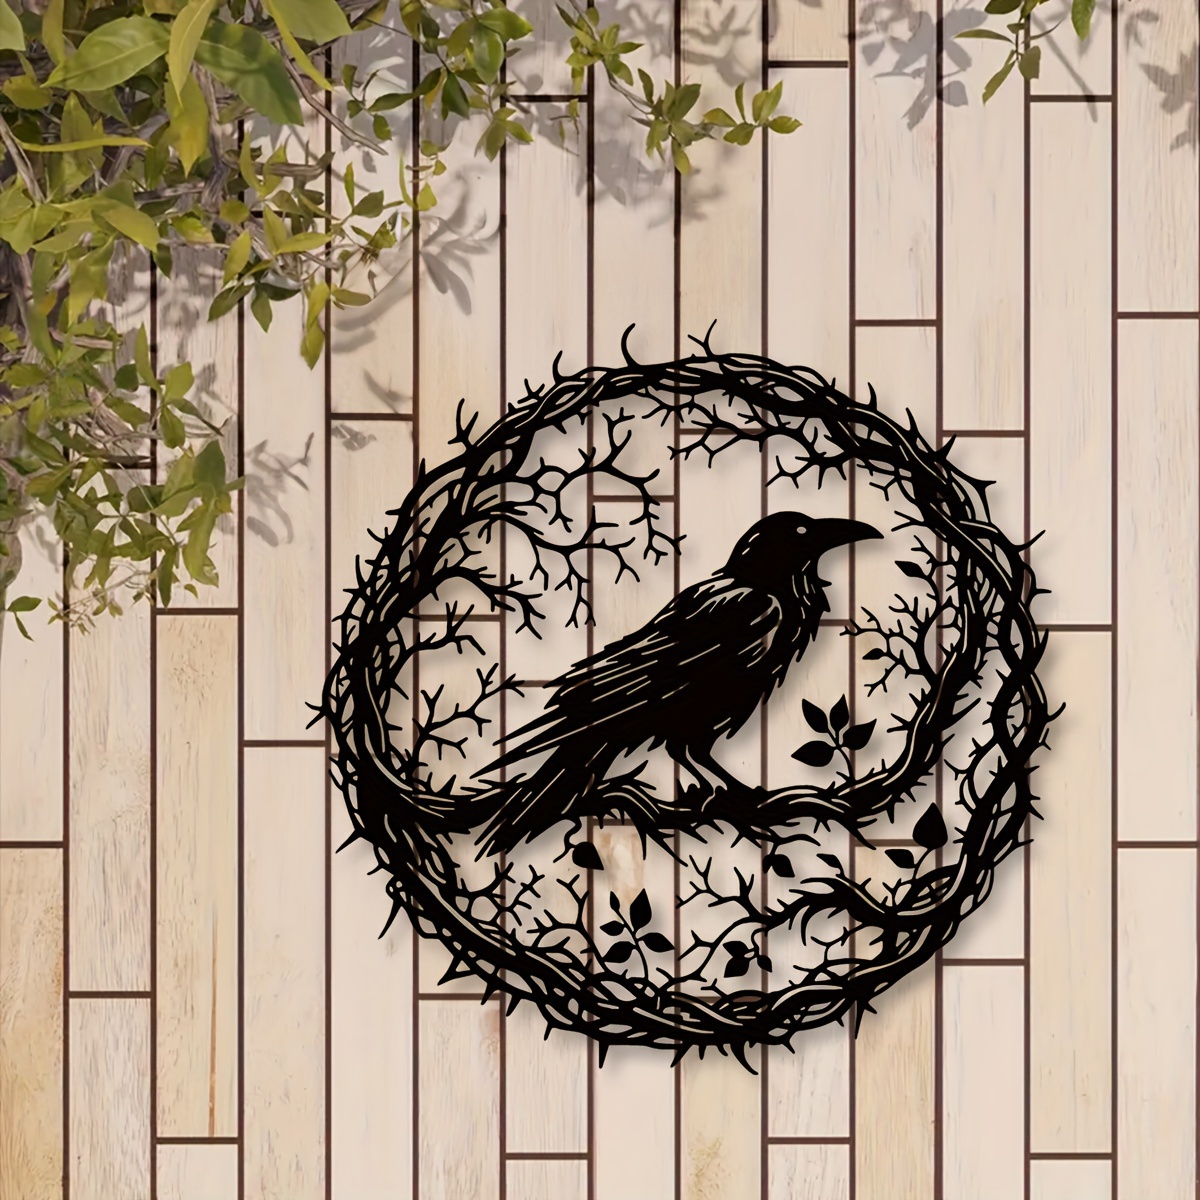 

1pc Gothic Artwork, Metal Wall Art, Birds On Branch Wall Decor, Gothic , Metal Crow Wall Sign, Unique Design Home Decor, Wildlife Lover Gift, Halloween Decor, Fall Decor, Gothic Wall Decor, Crow Decor